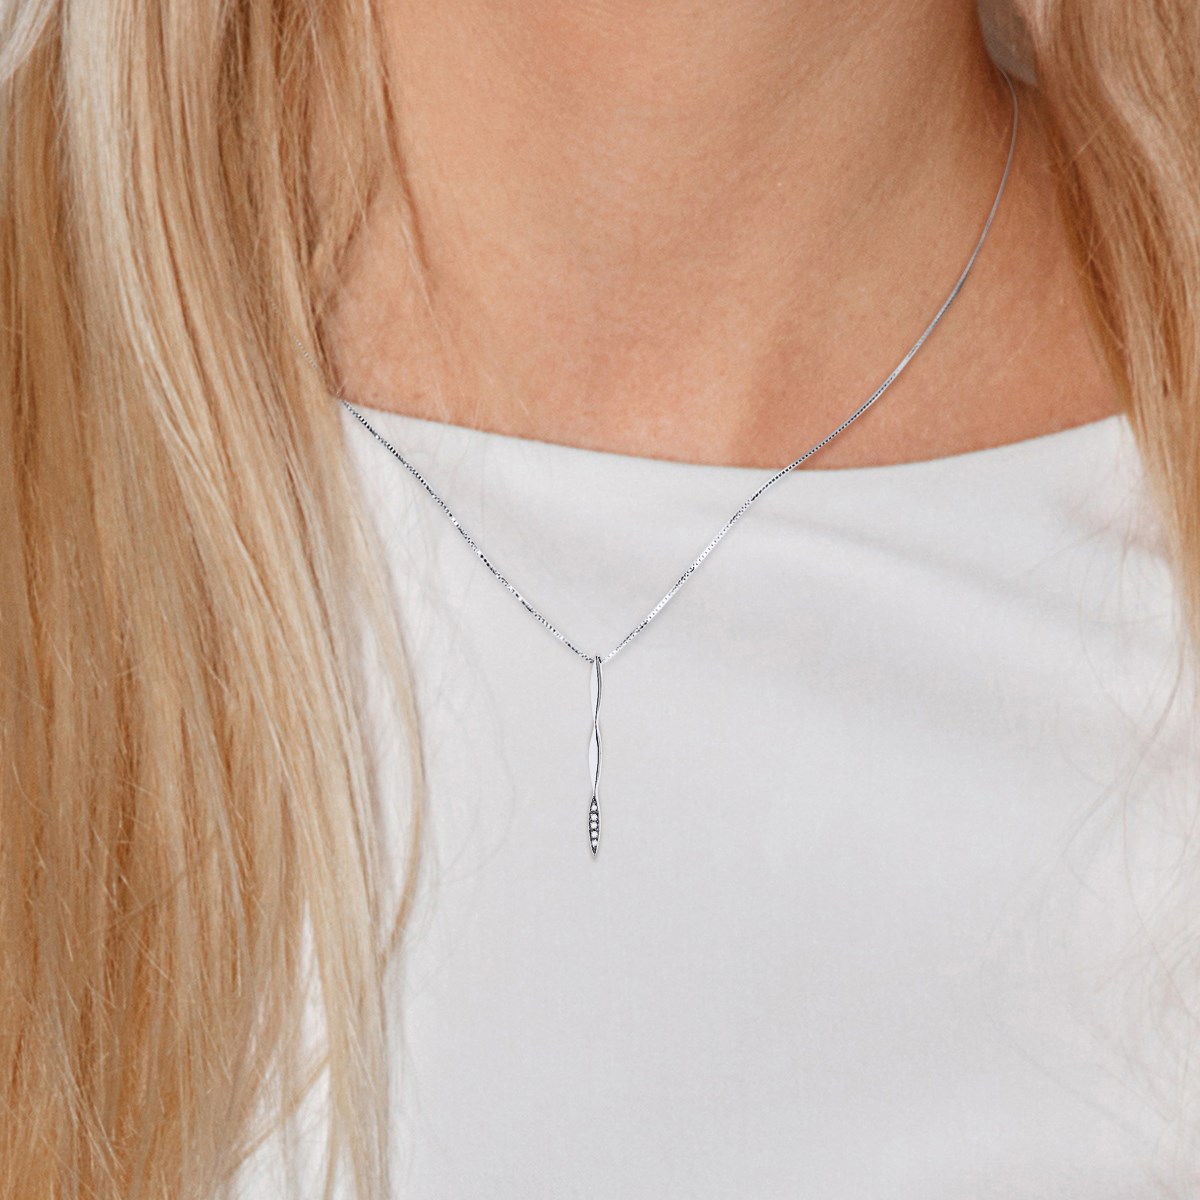 Collier Diamants 0,020 Cts Or Blanc 18 Carats - vue 2